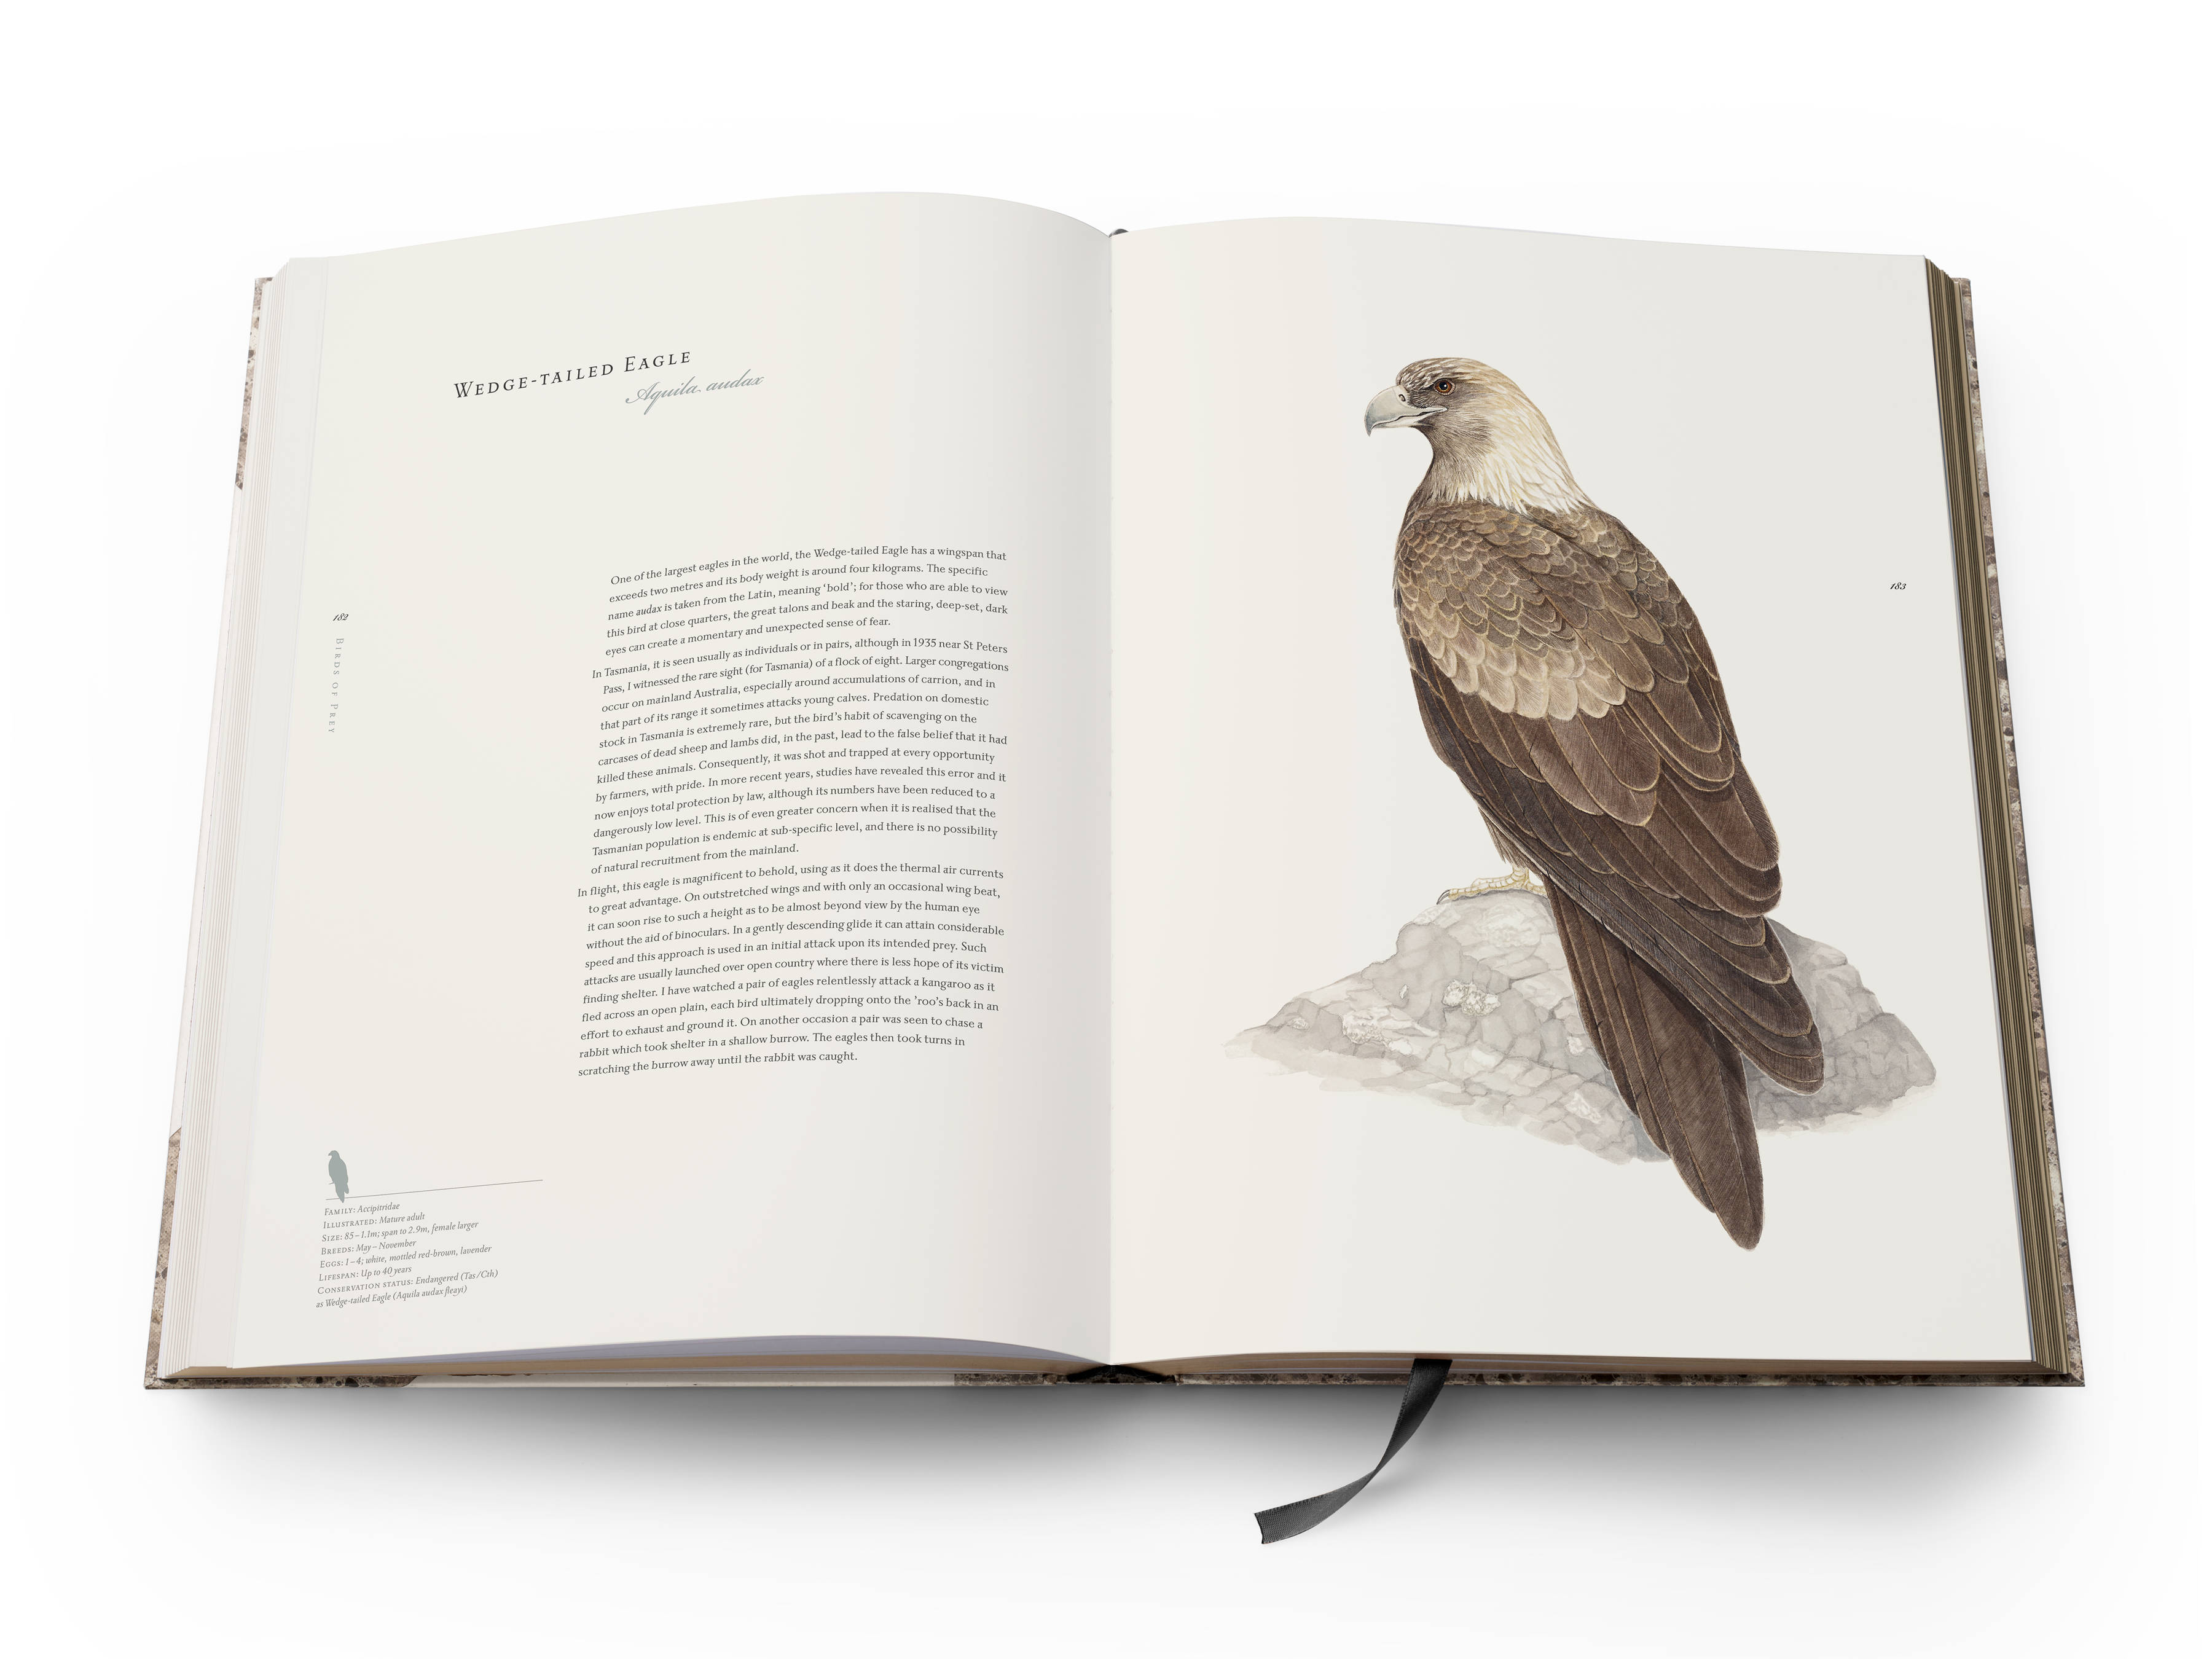 A double page spread from the book with text on the left and a full-page colour plate of a Wedge-tailed Eagle ‘Aquila audax’ on the right.